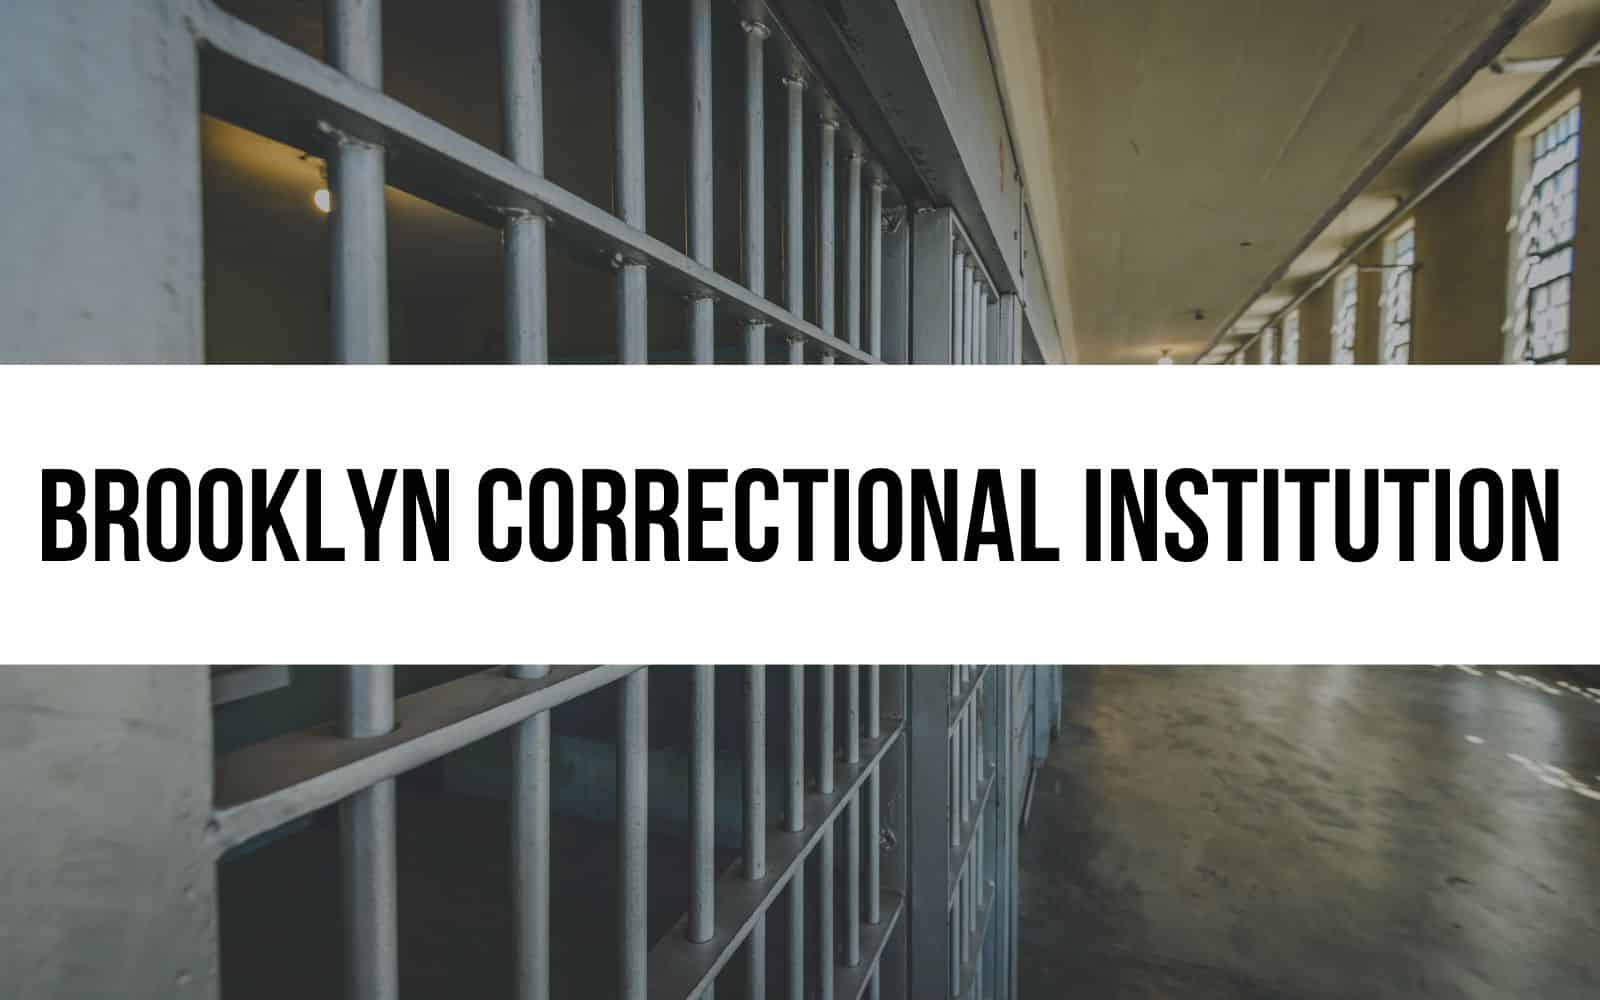 Brooklyn Correctional Institution